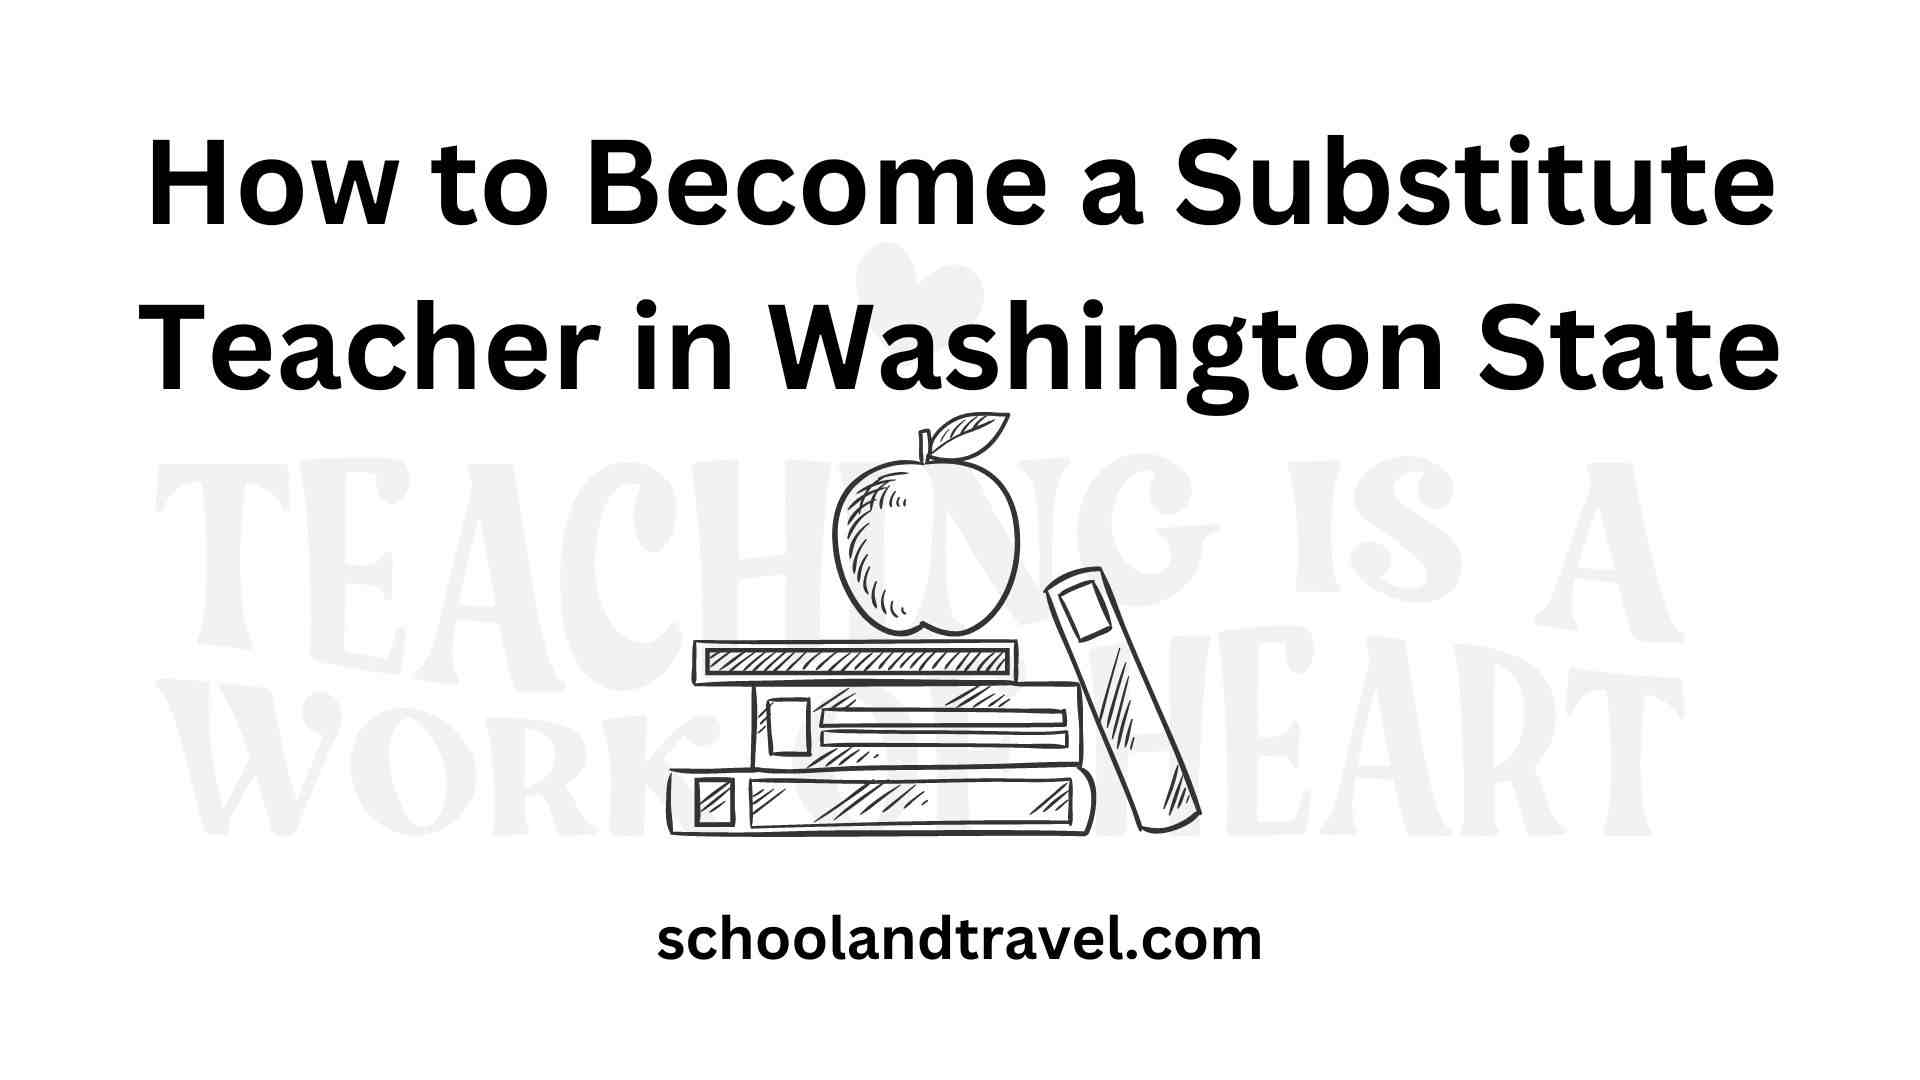 How to Become a Substitute Teacher in Washington State